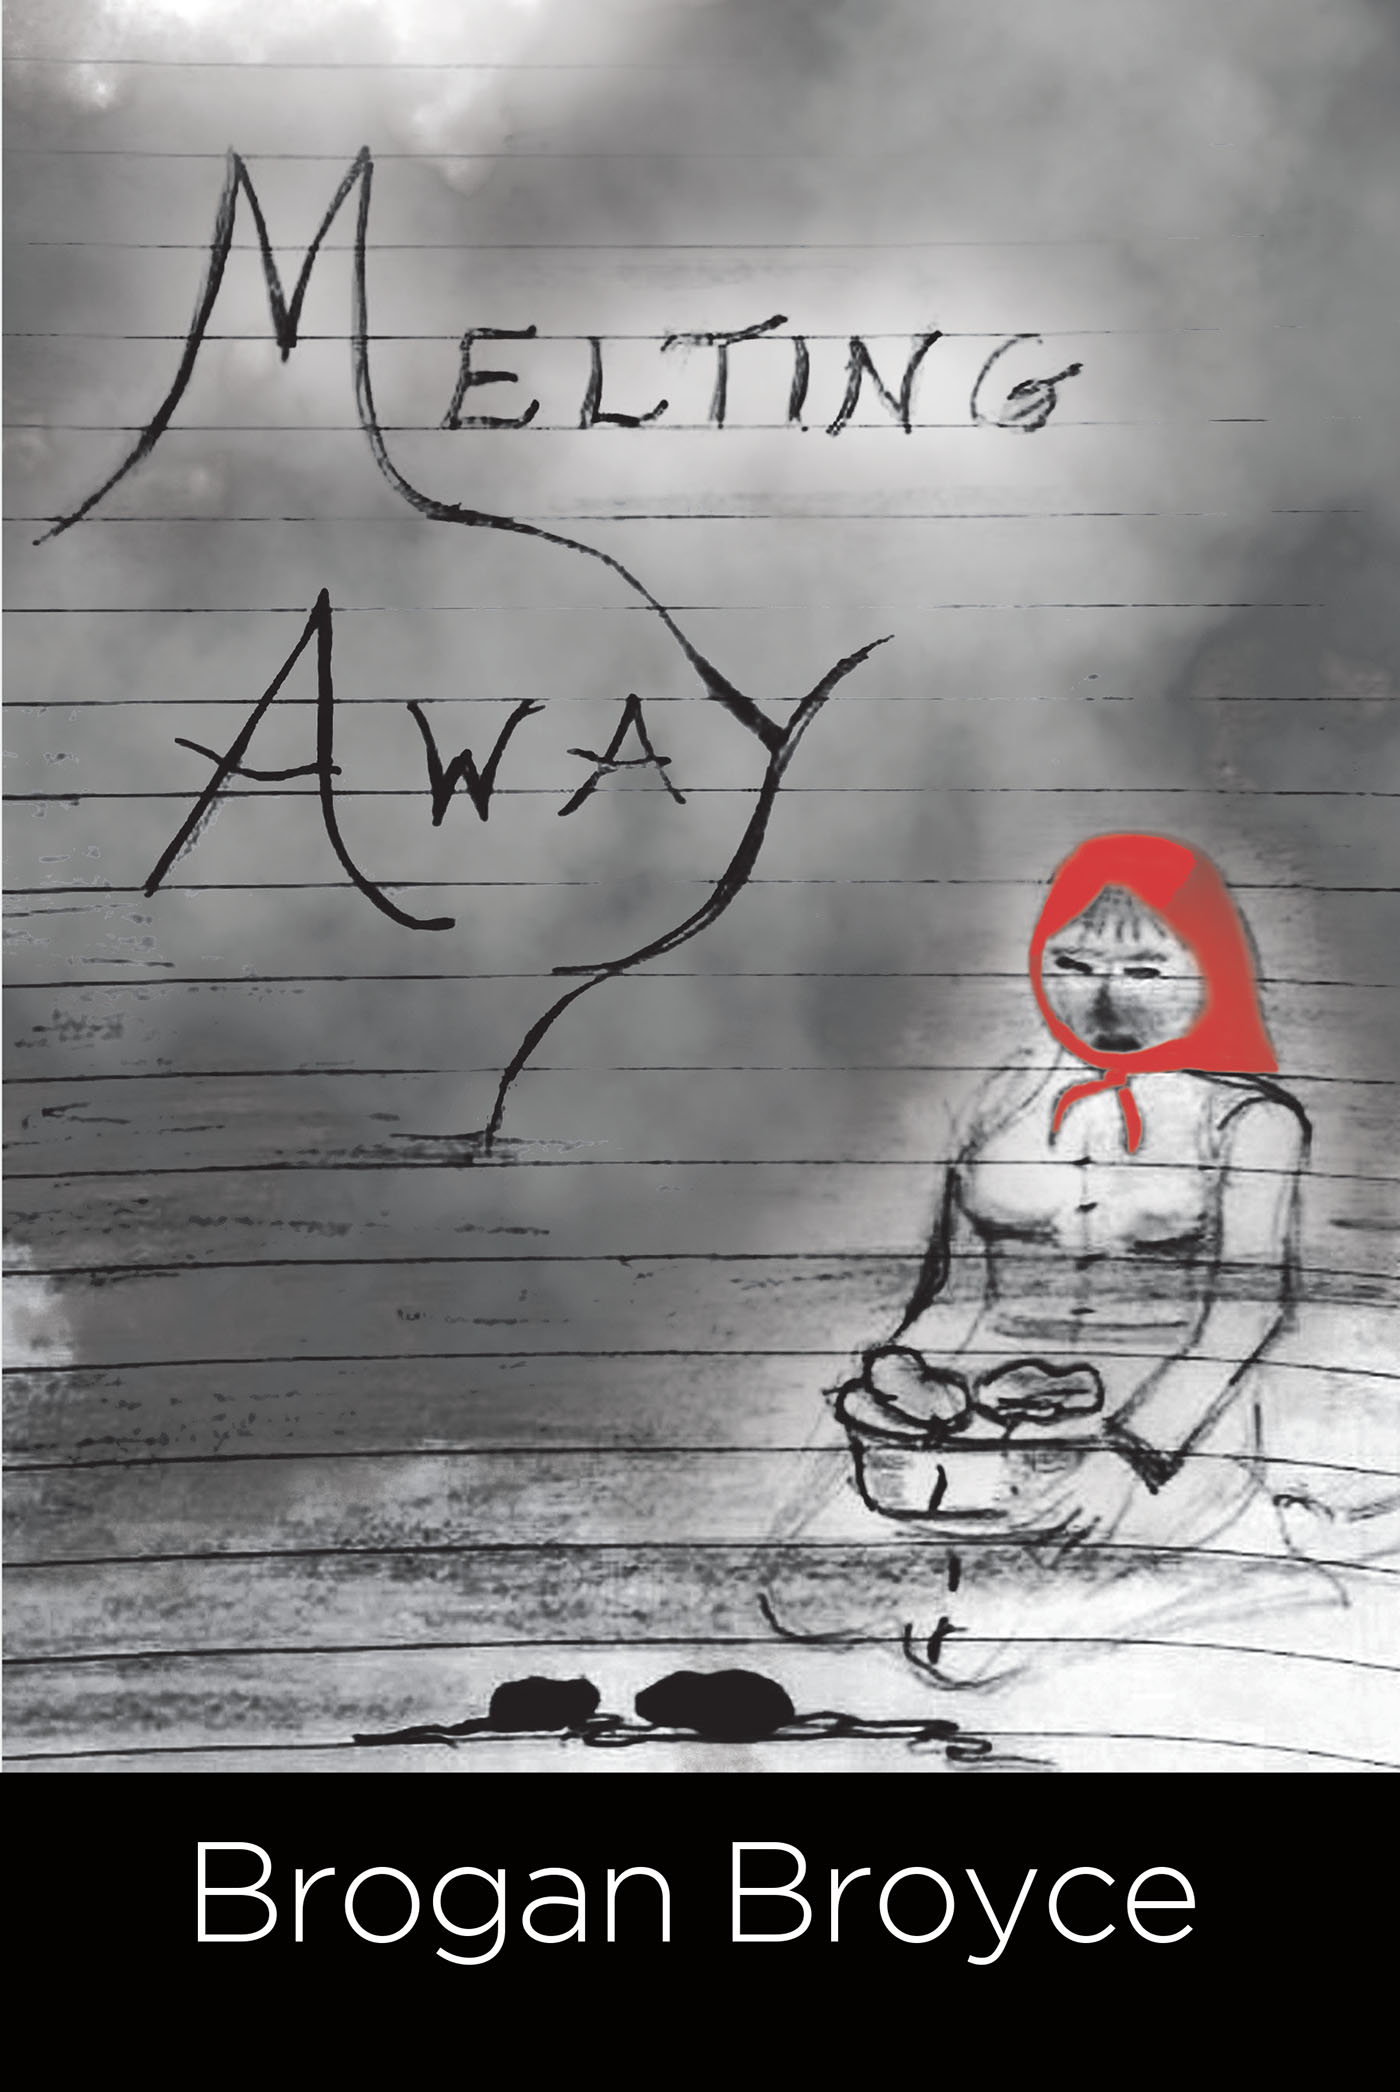 Author Brogan Broyce’s New Book, "Melting Away," is a Captivating Story That Takes Readers Back in Time to Witness What Life Was Like During the Great Irish Famine